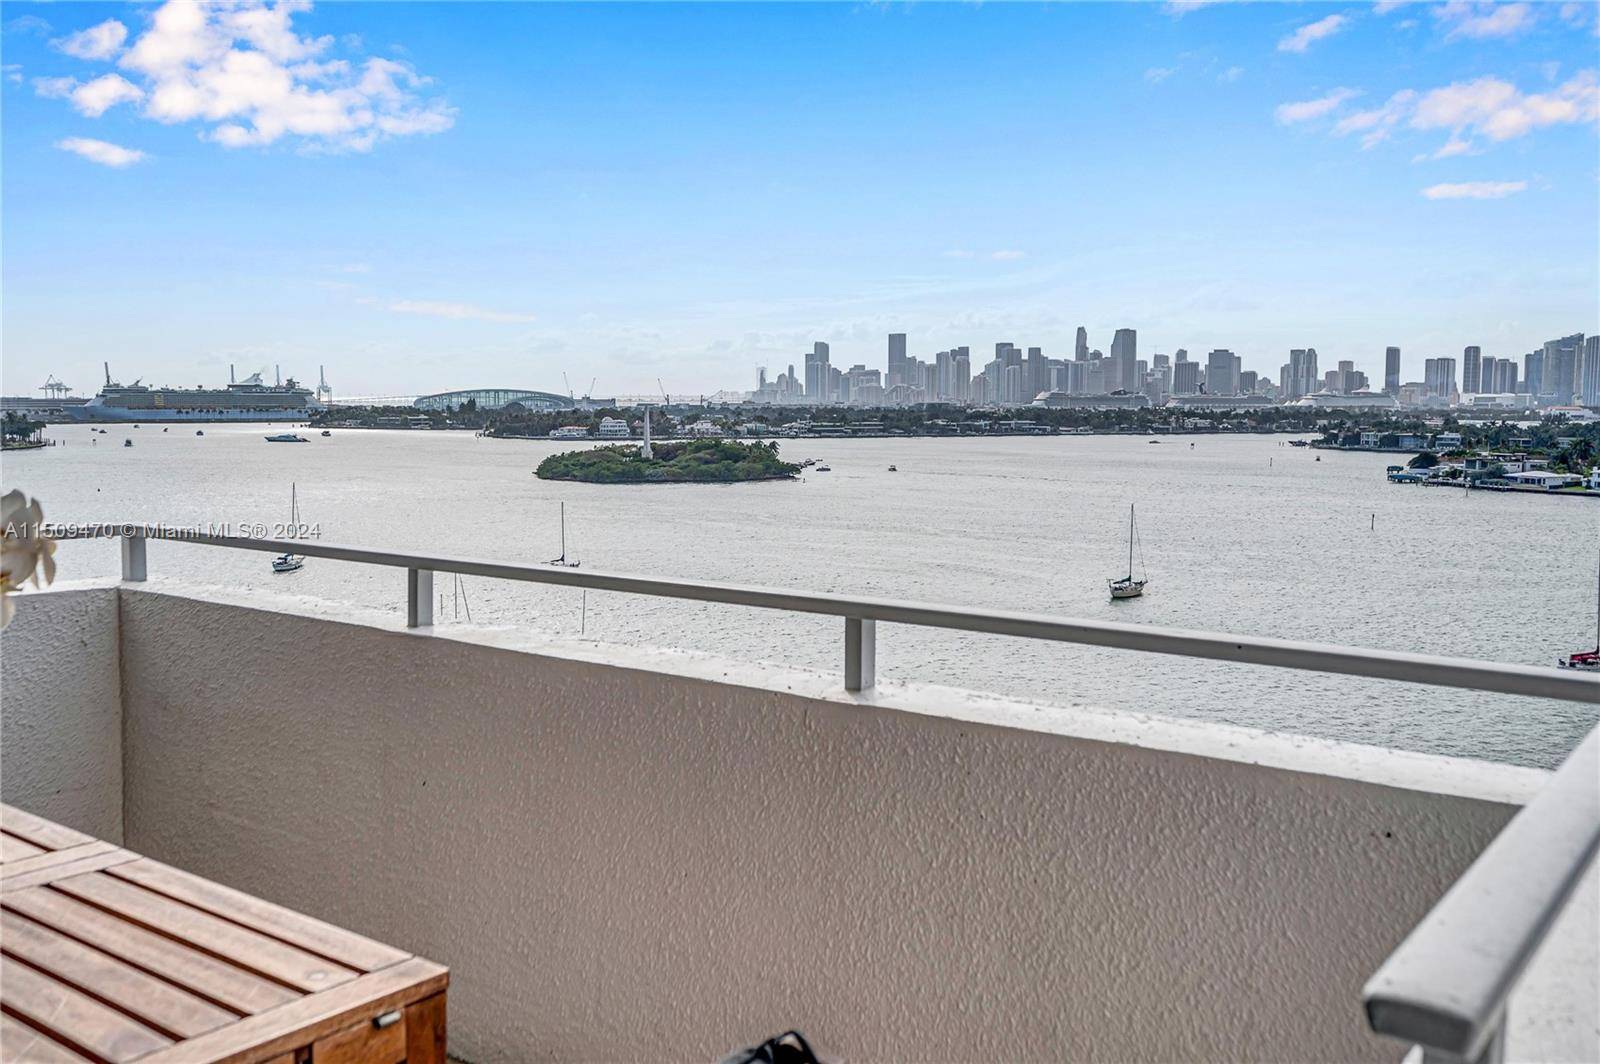 Wake up each day to beautiful bay views, soft natural light from wall to wall windows, a great open balcony to enjoy tropical breezes and stellar downtown views.